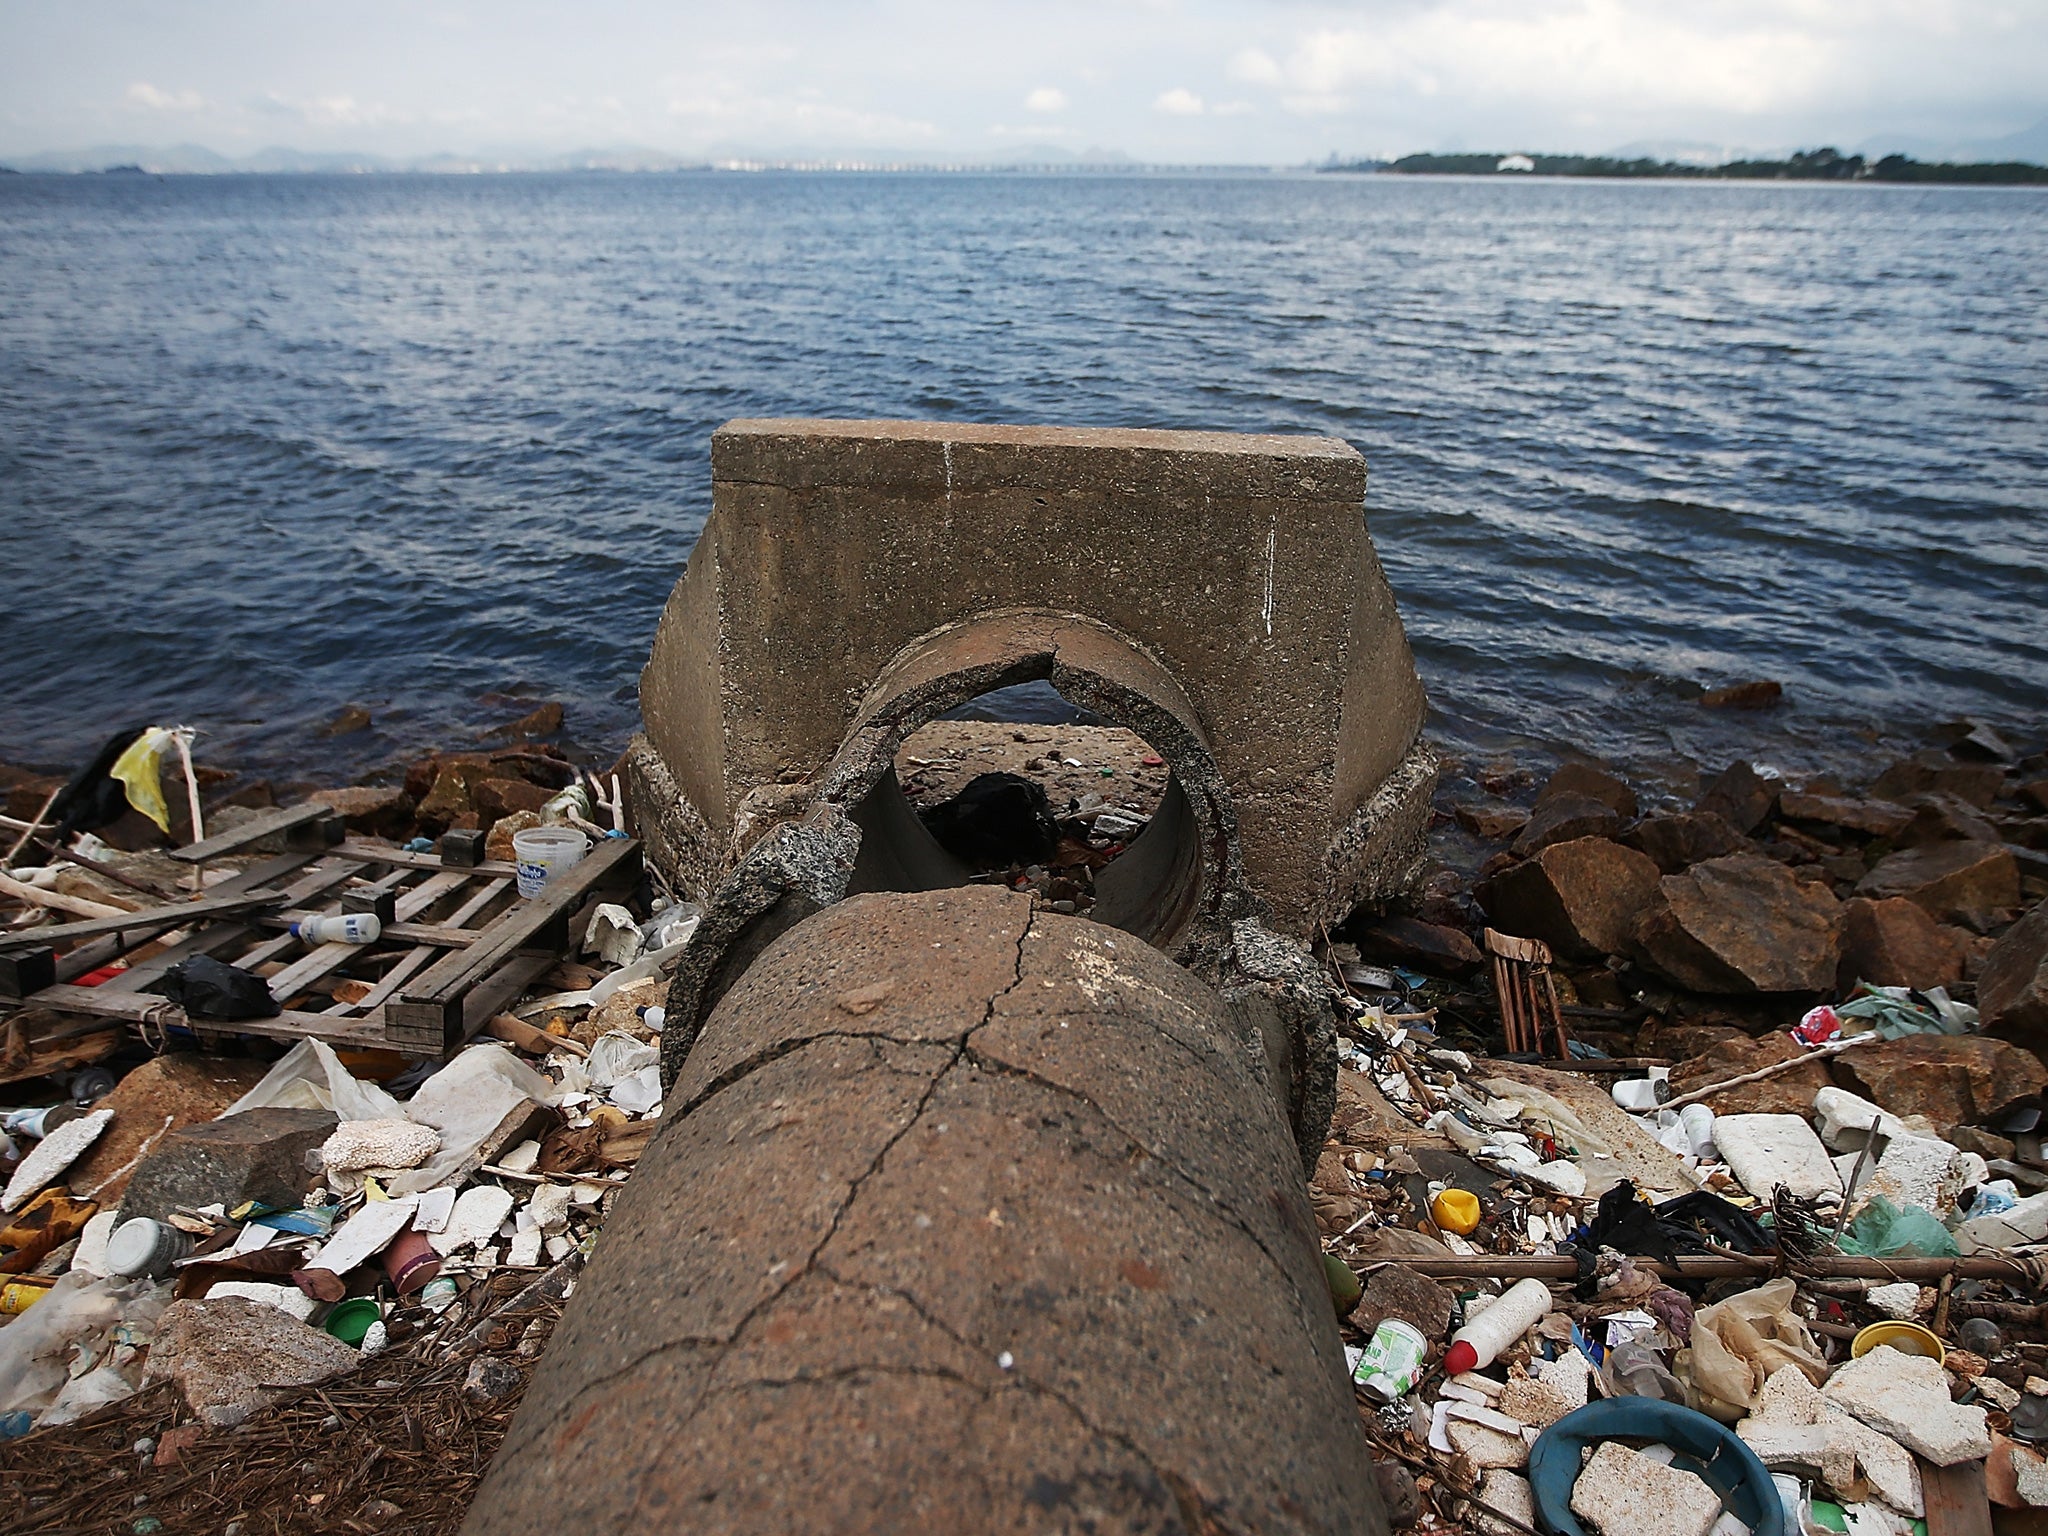 According to the Deputy State Secretary of Environment just 34 percent of Rio's sewage is treated while the remainder flows untreated into the waters. Source: Getty Images